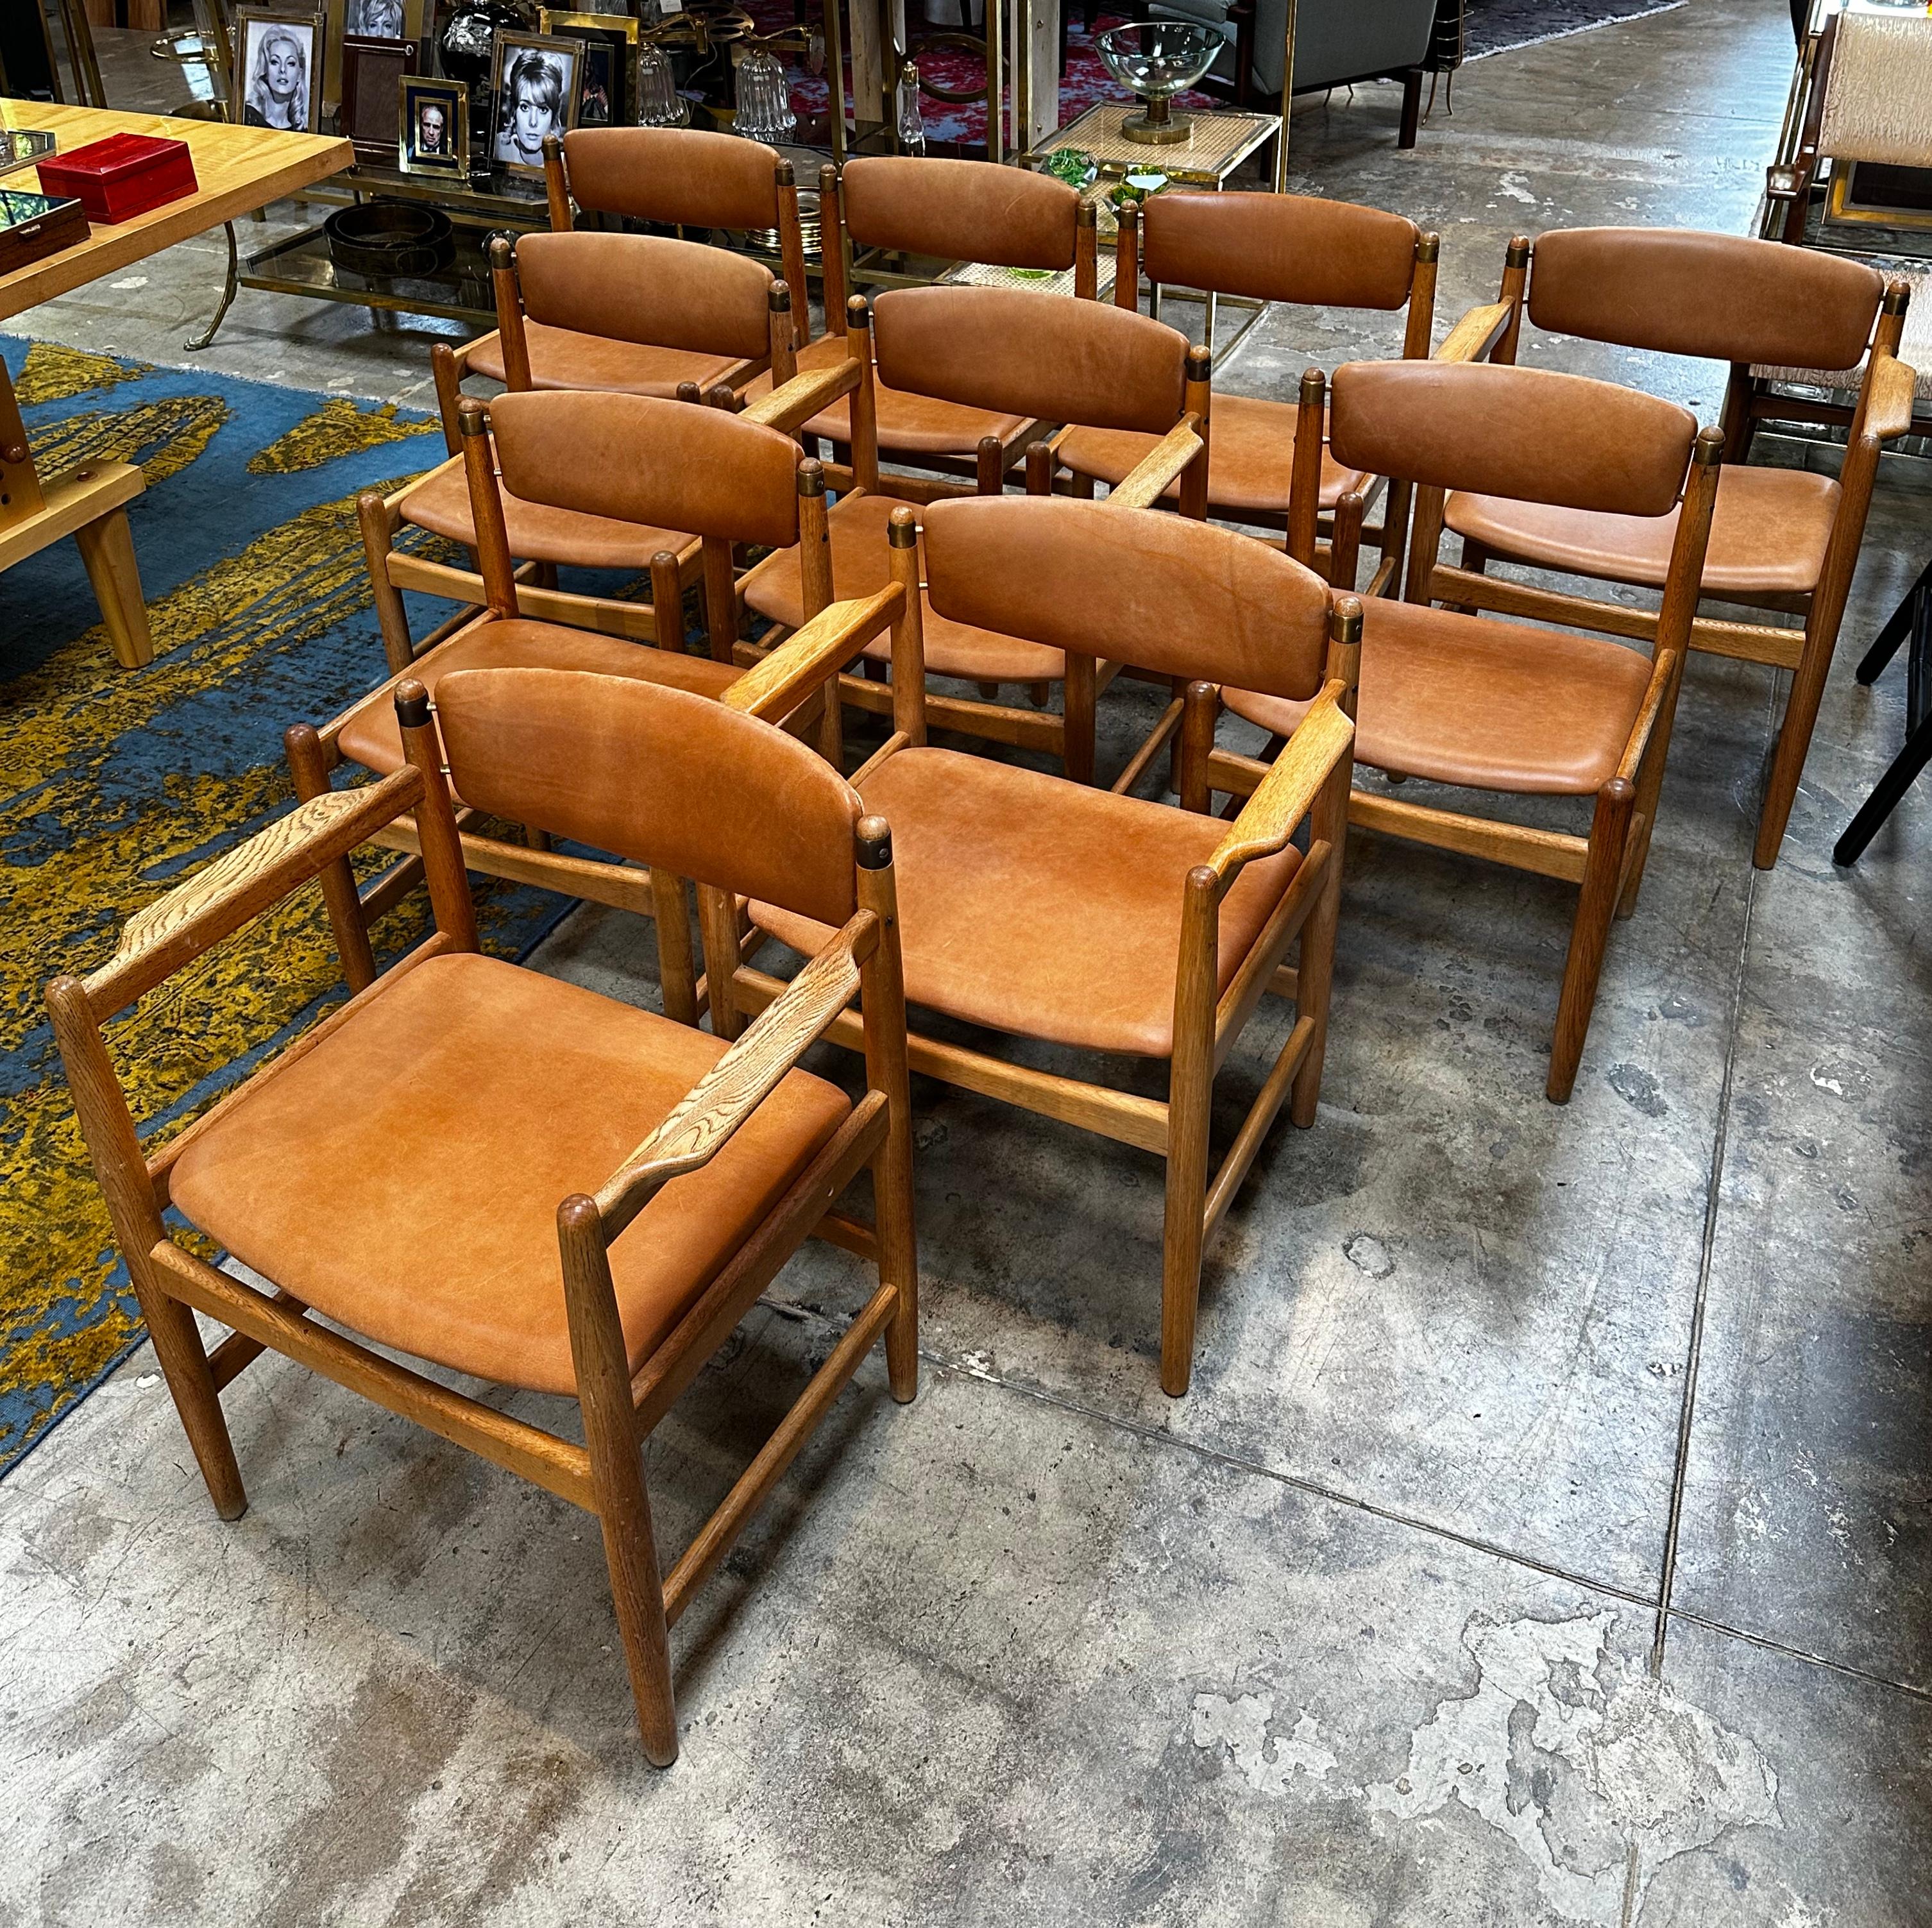 This set of four Model 537 oresund chairs was designed by Borge Mogensen for Karl Andersson & Söner. It has been in production since 1955. These chairs stem from the first production period. The design was inspired by American Shaker furniture. It